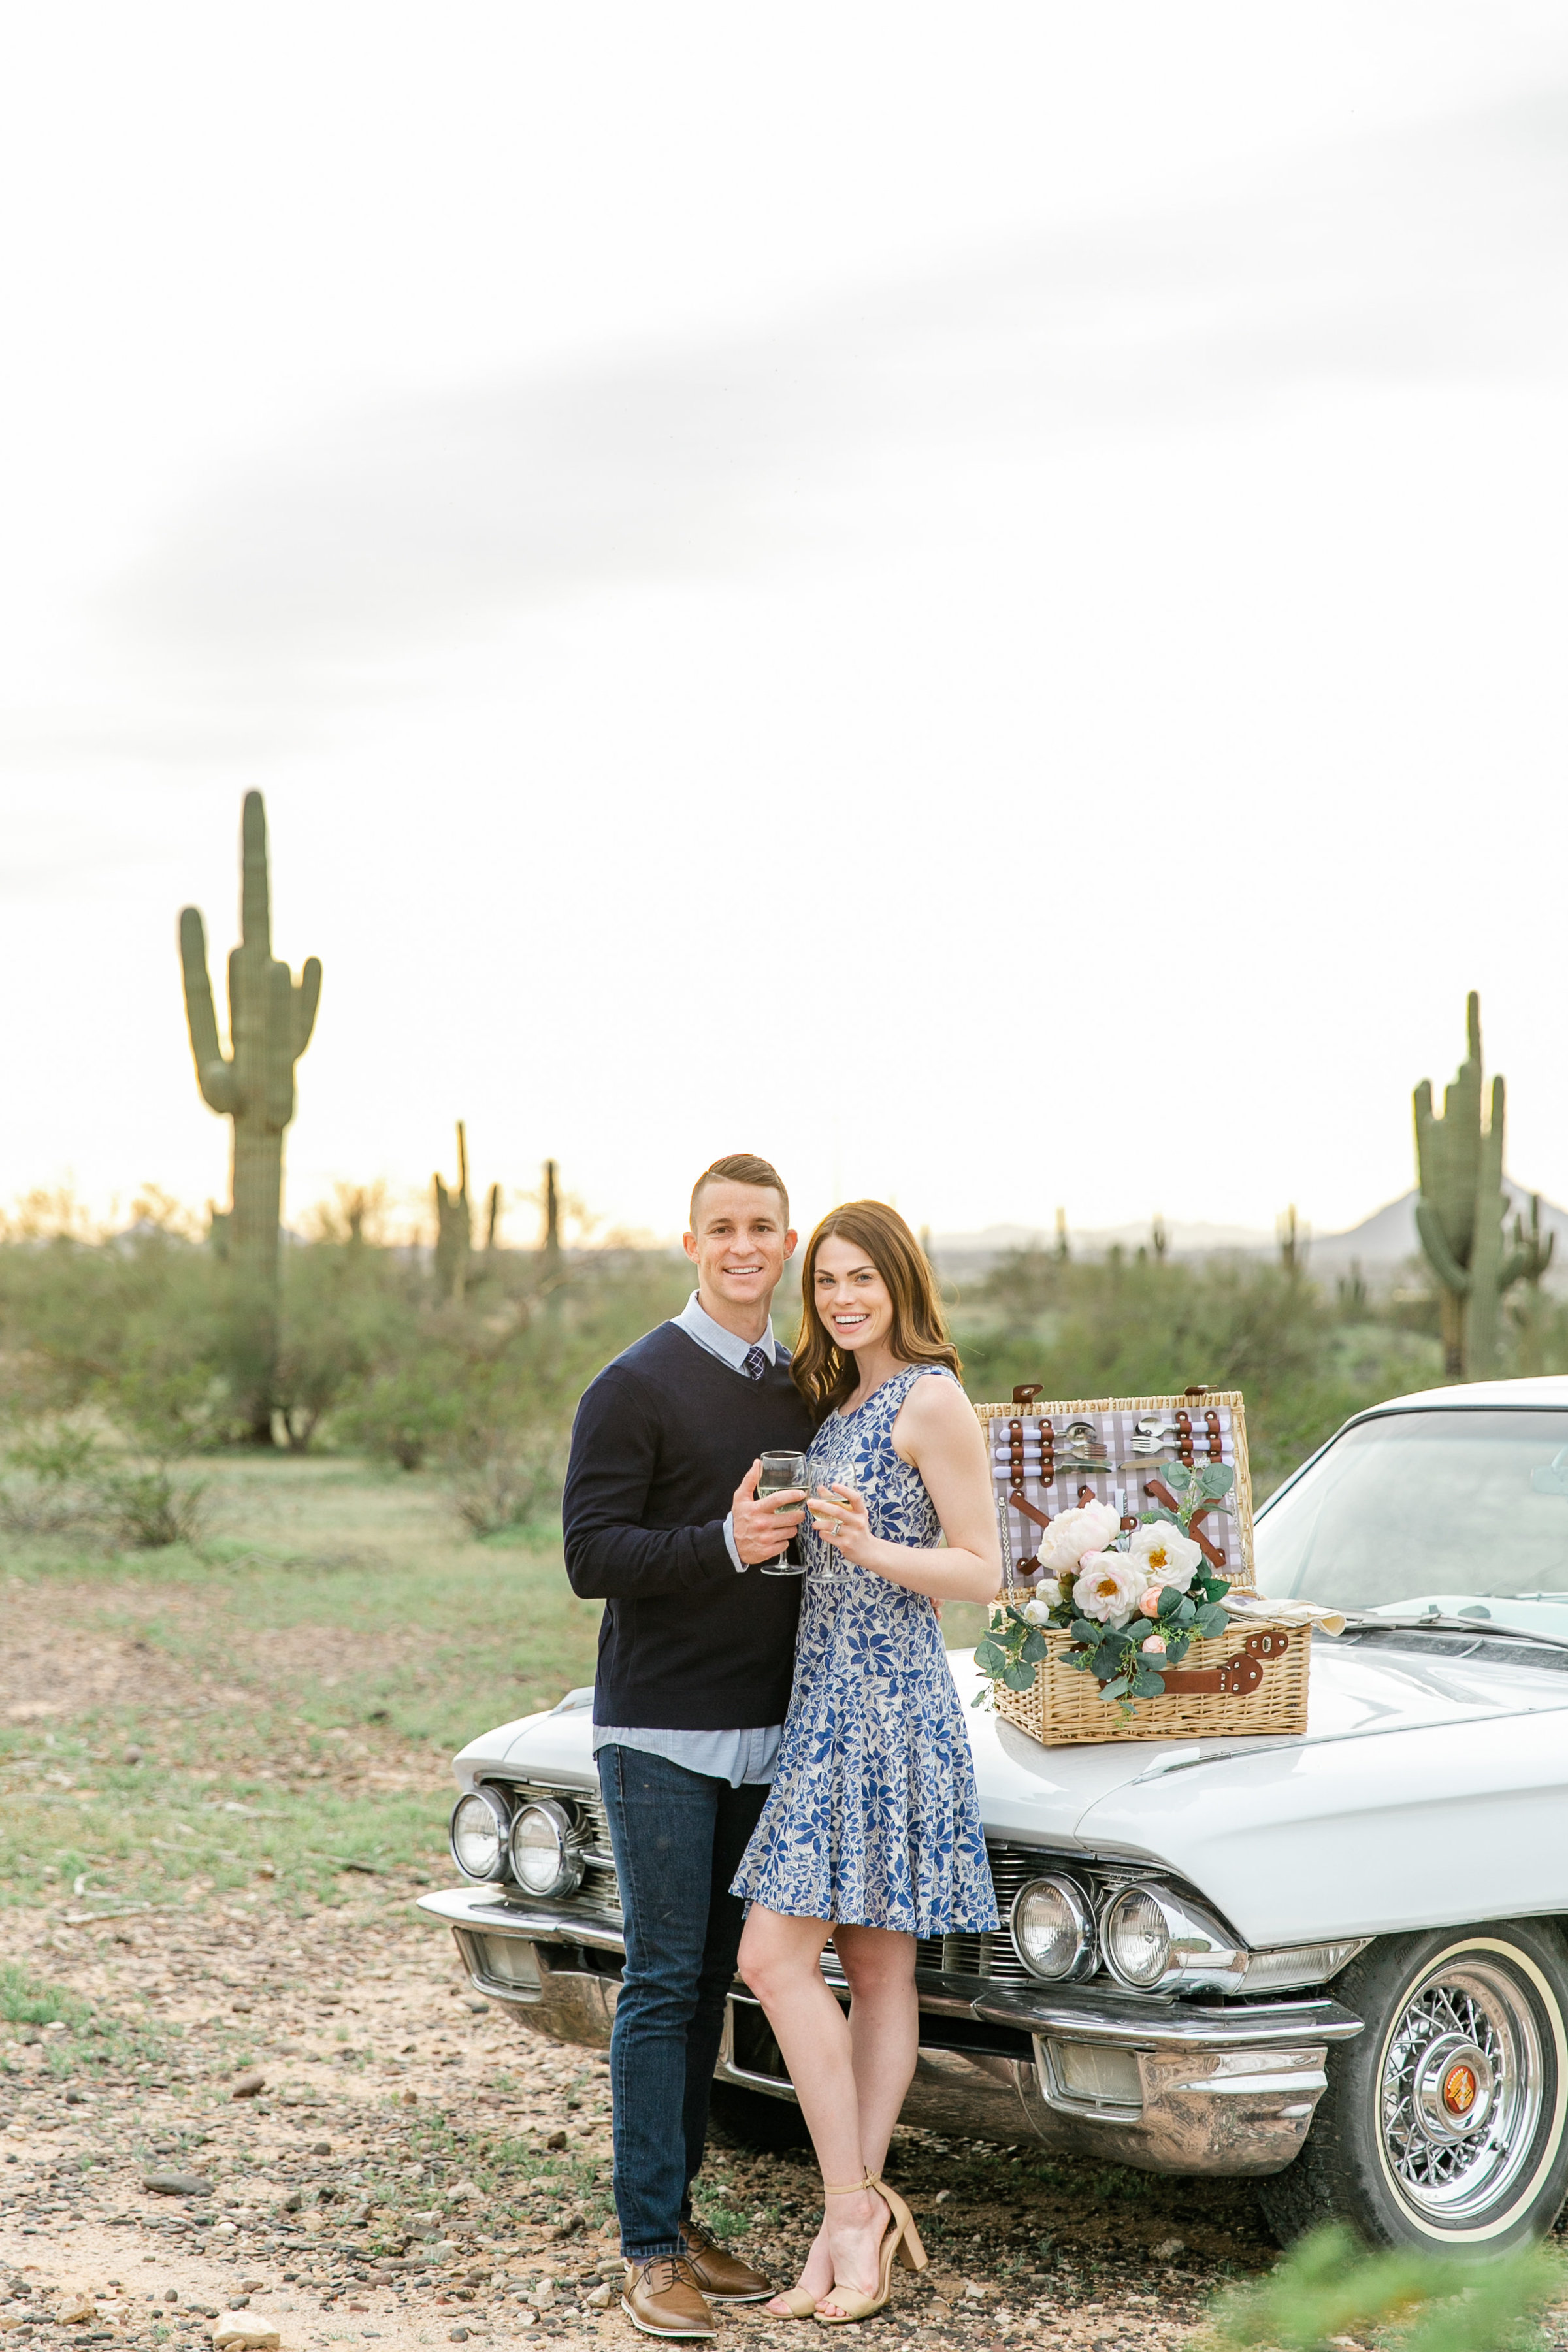 Karlie Colleen Photography - Arizona Engagement Photos- Chacey & Stefan-237